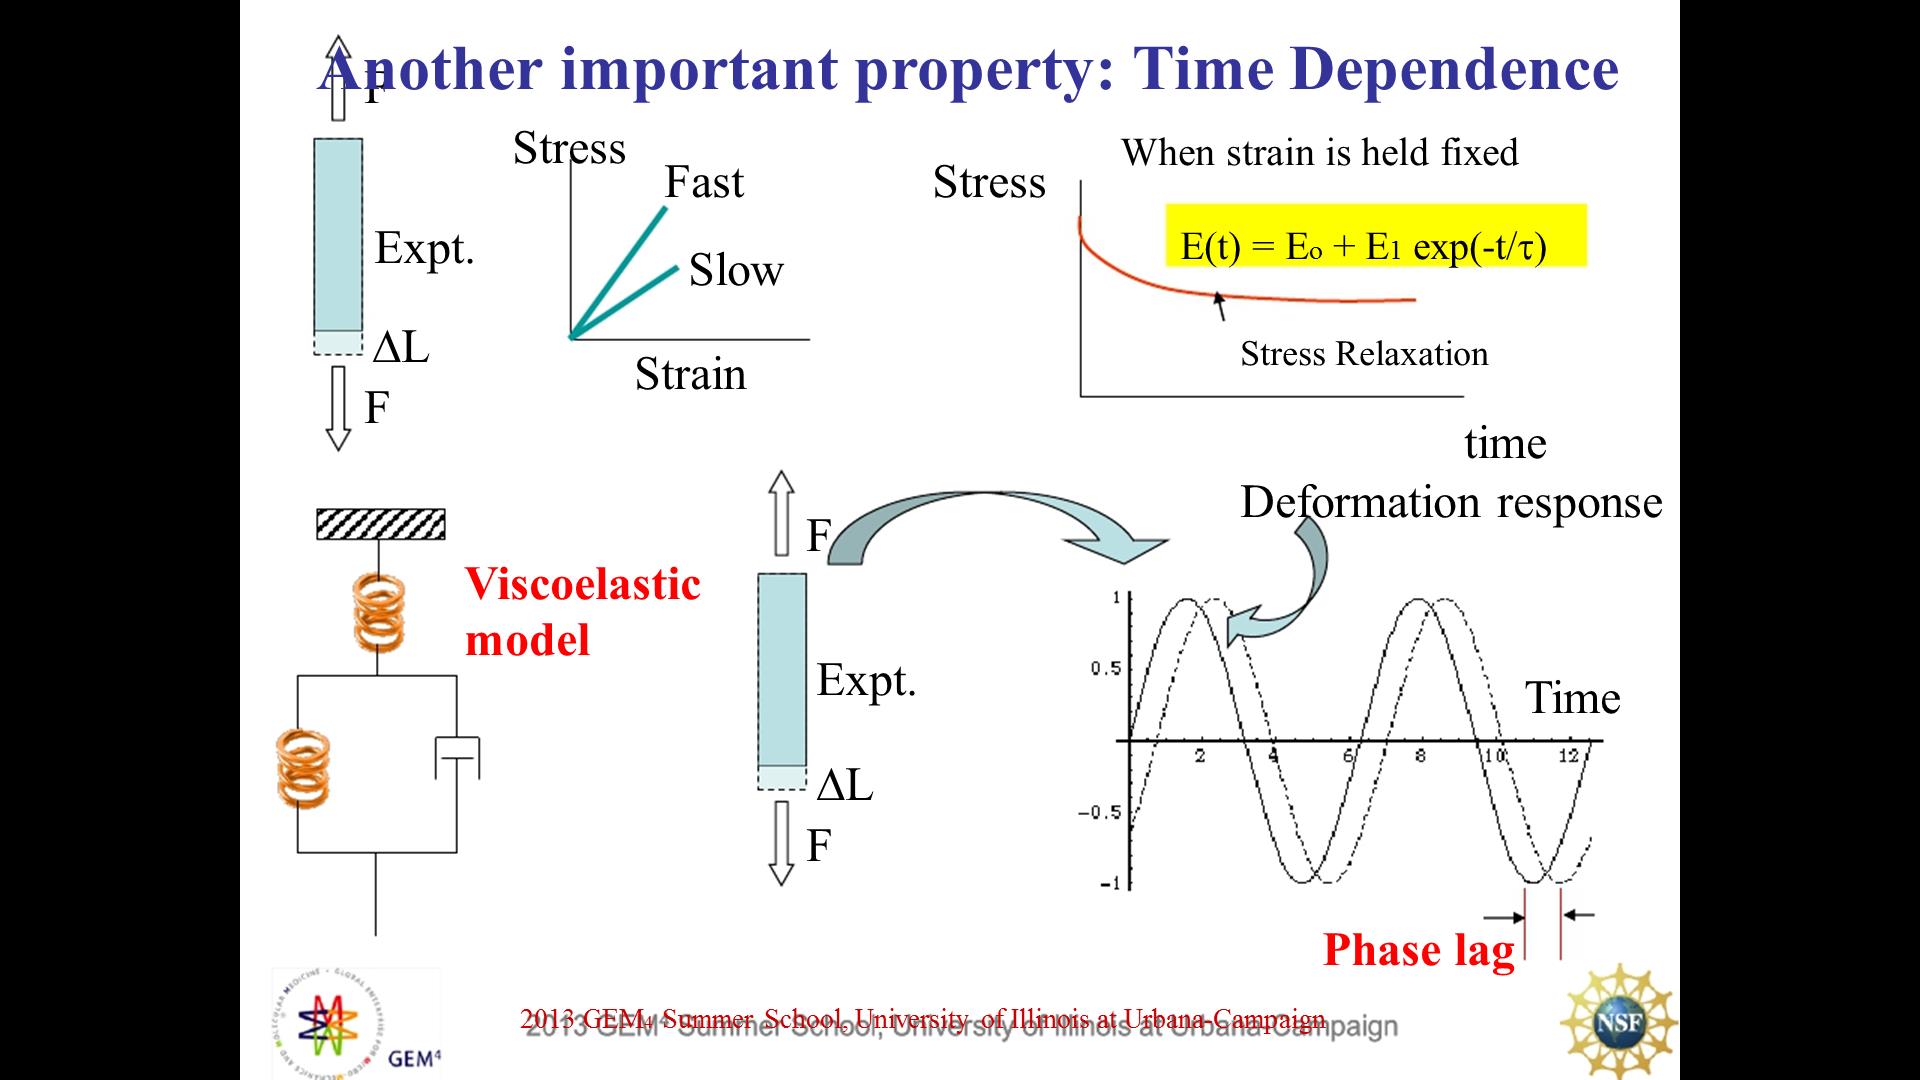 Another important property: Time Dependence